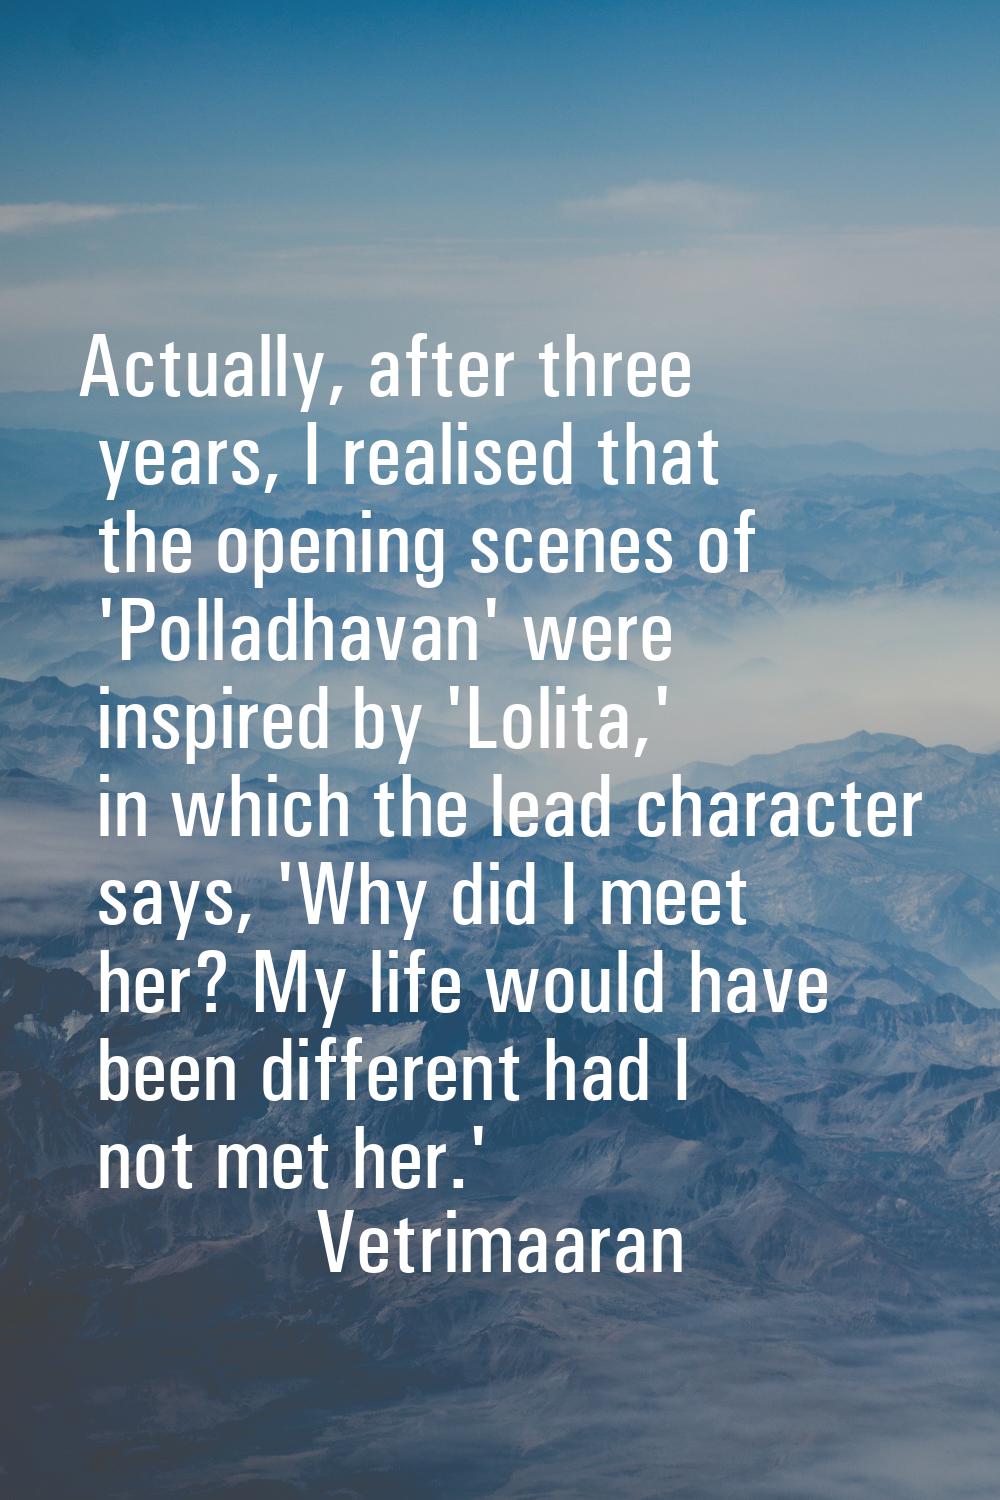 Actually, after three years, I realised that the opening scenes of 'Polladhavan' were inspired by '